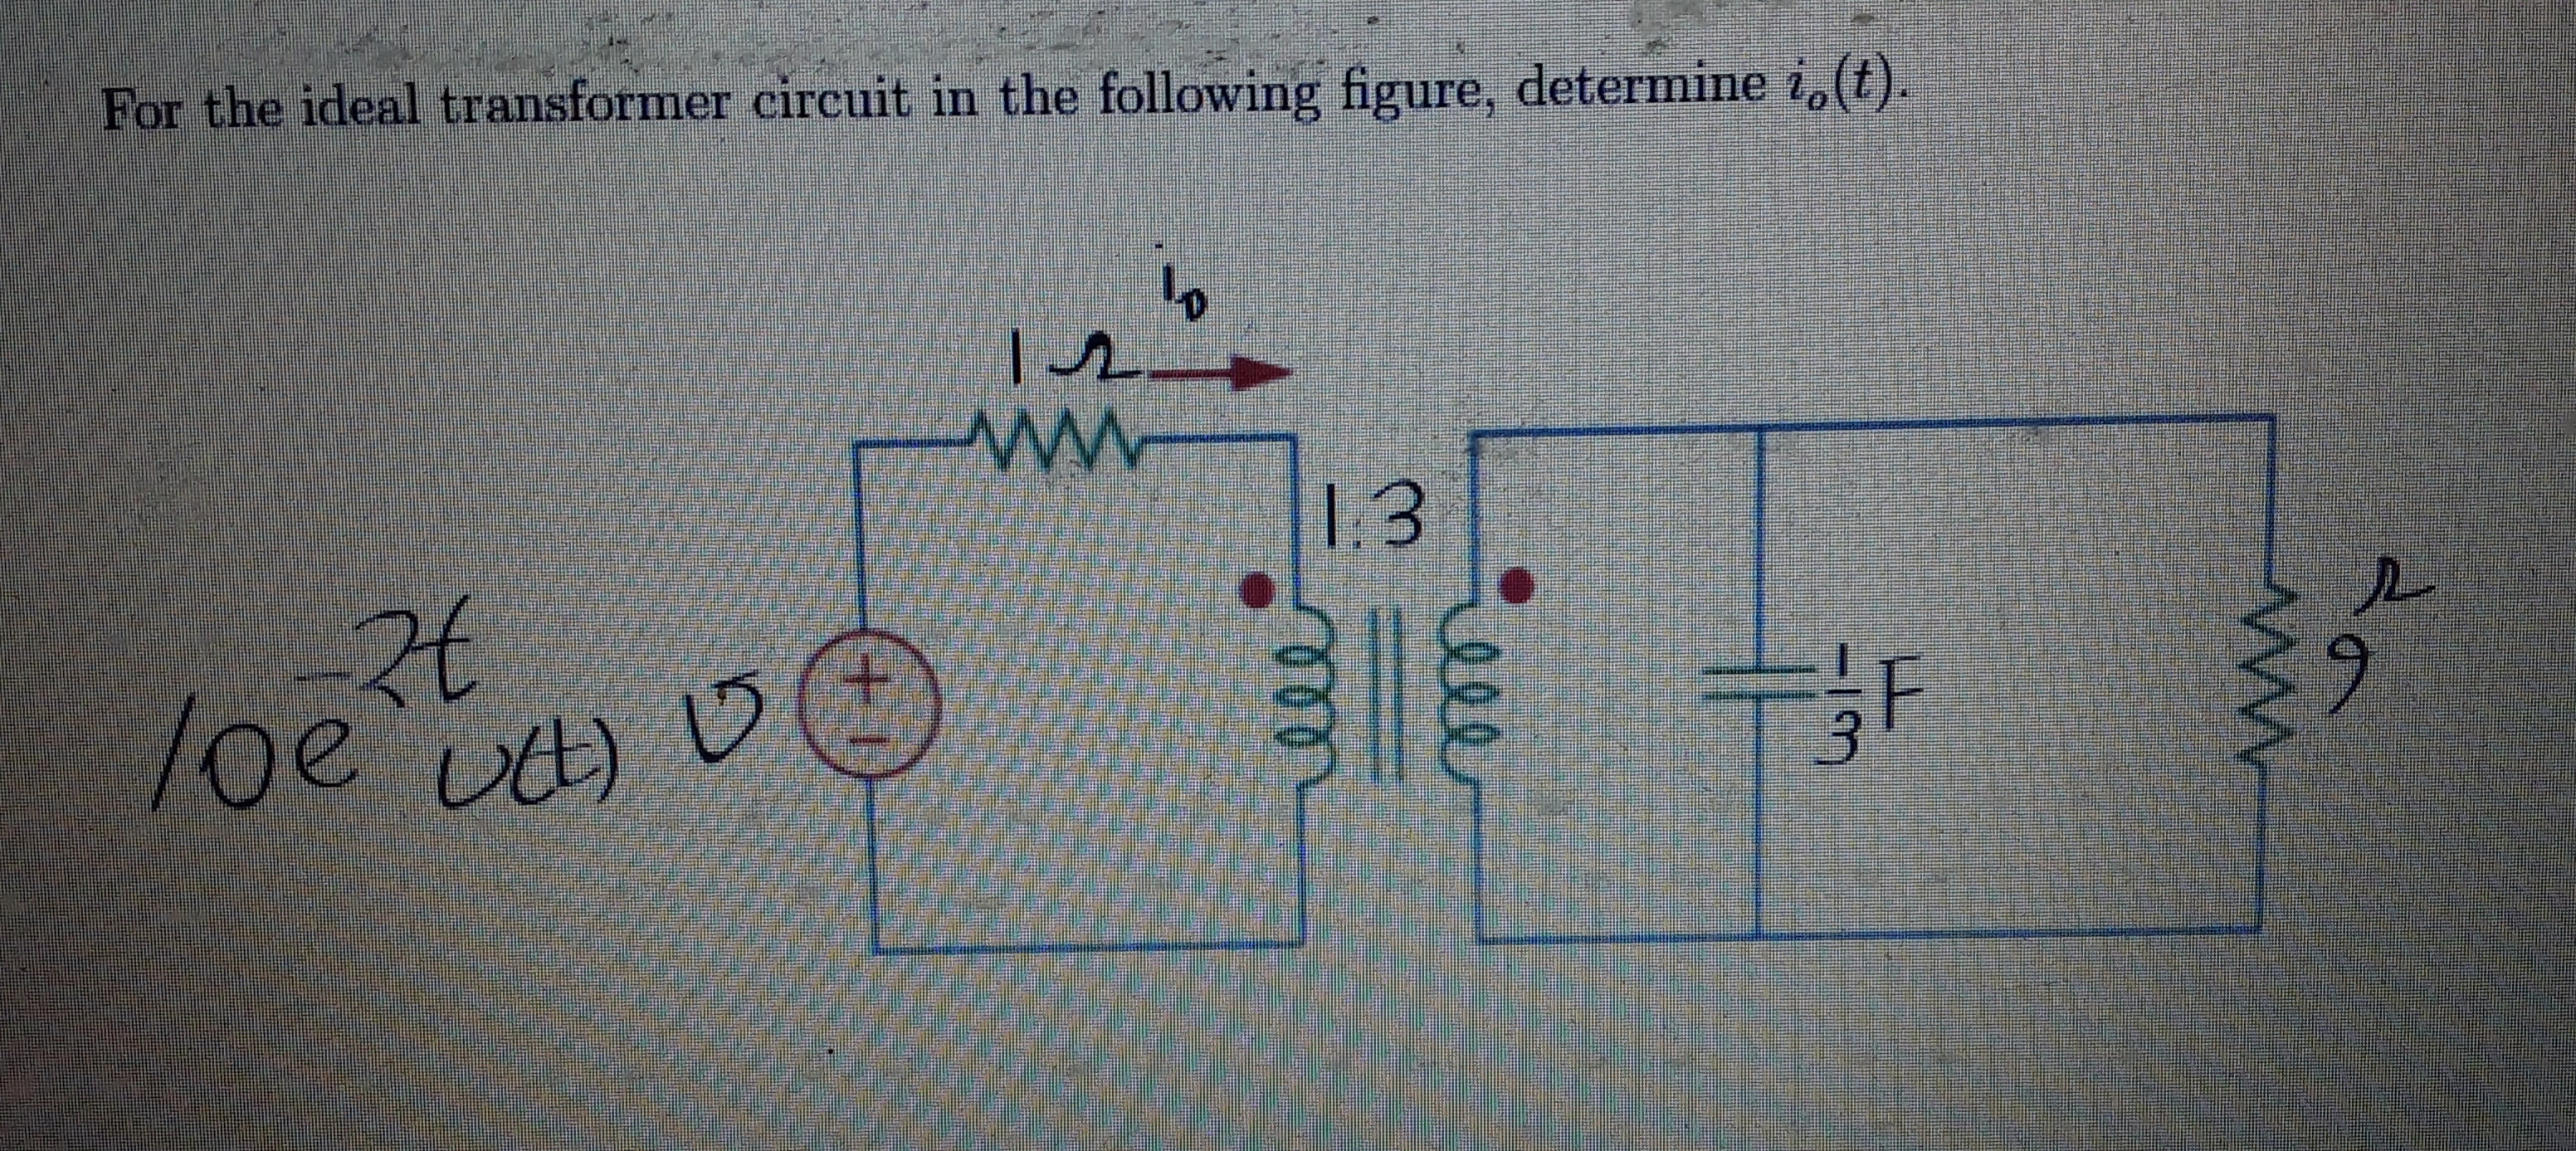 For the ideal transformer circuit in the following figure, determine i,(t).
